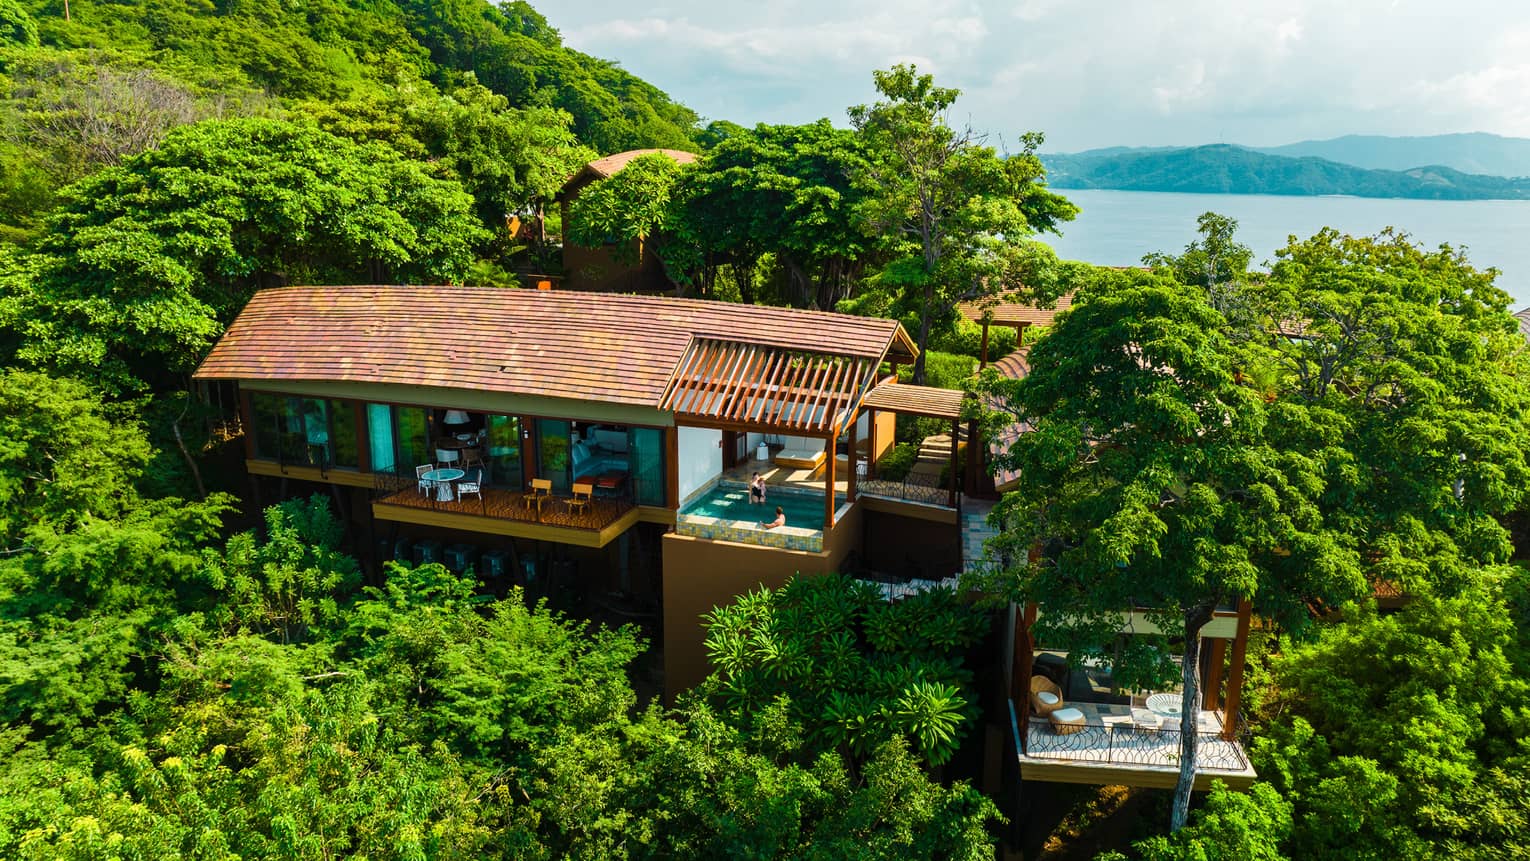 Private villa tucked away in a jungle canopy surrounded by greenery with the ocean in the distance